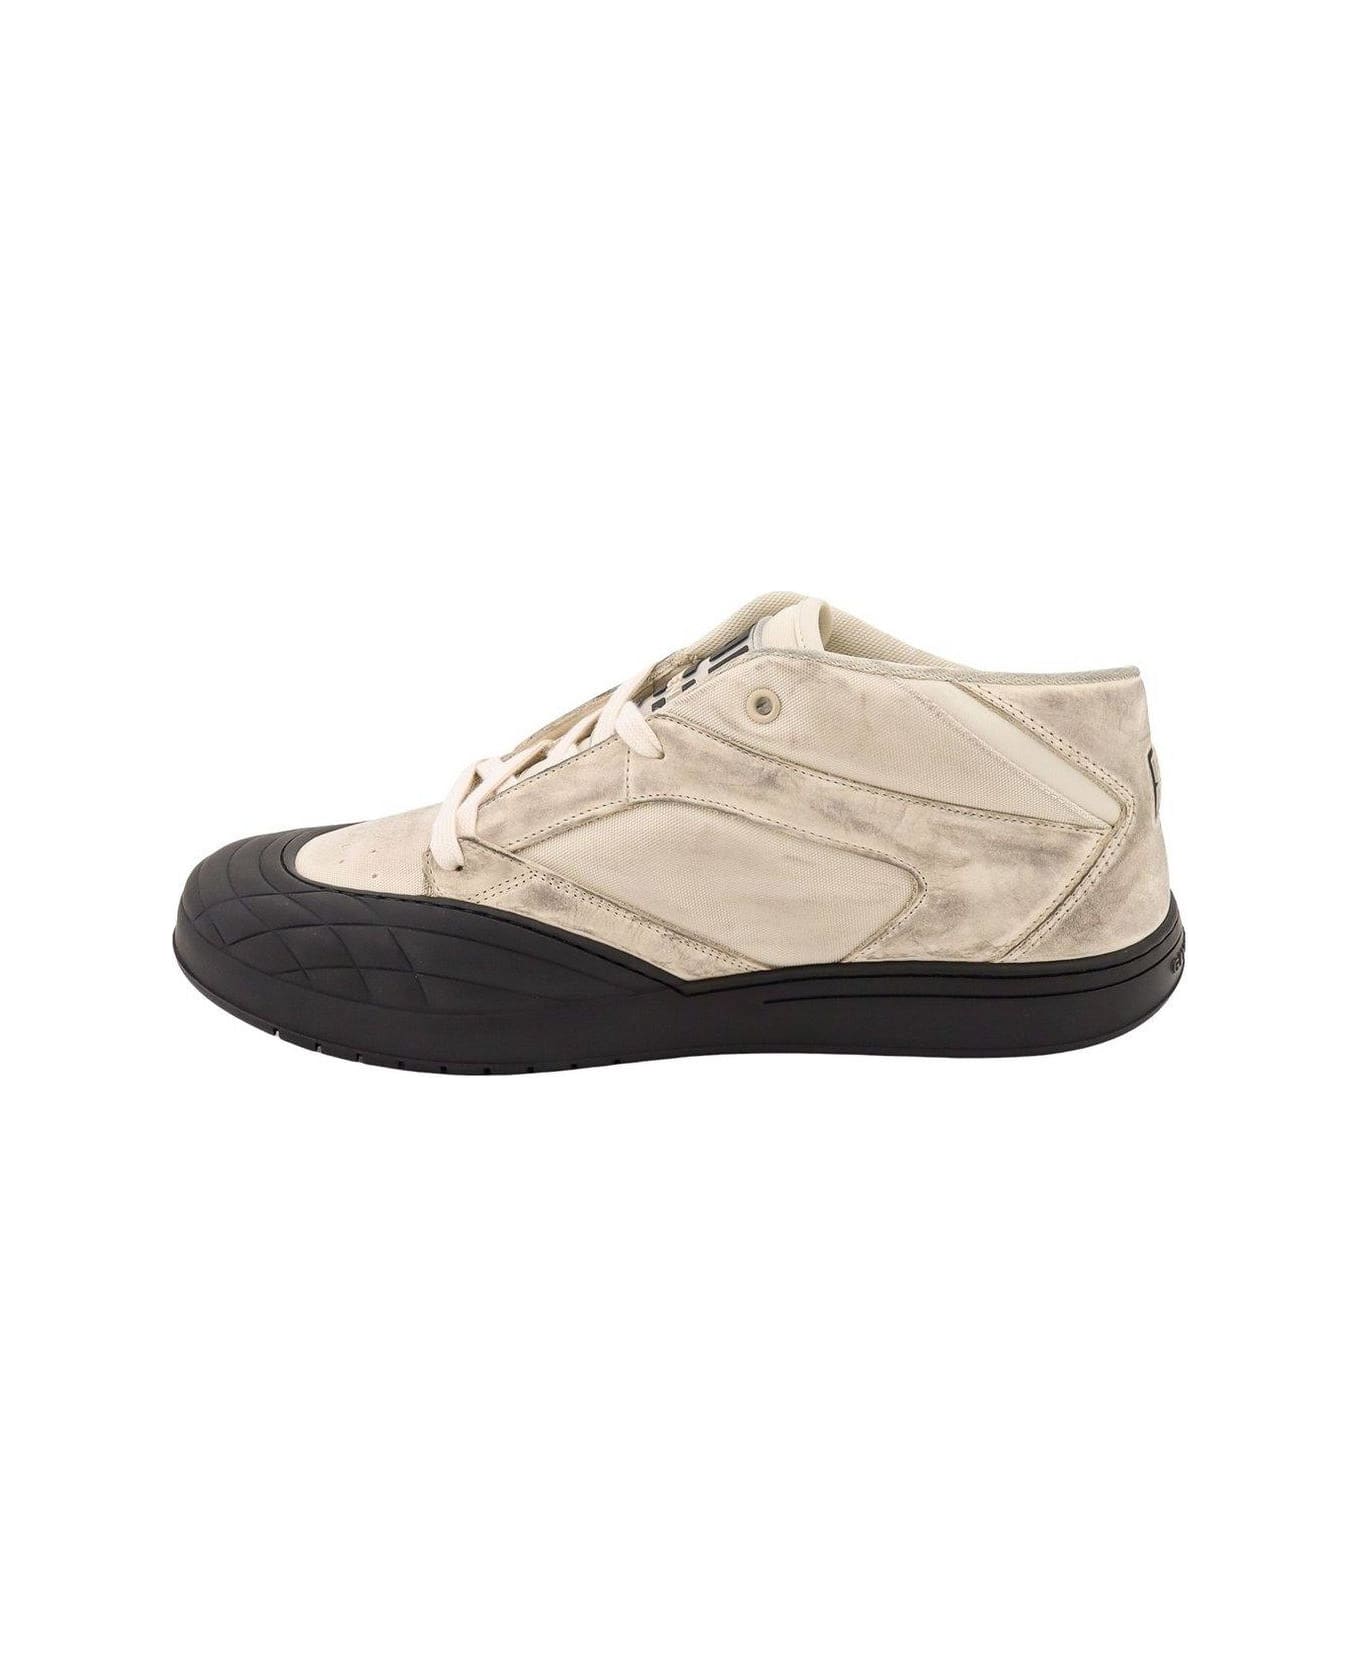 Givenchy Skate Sneakers - White スニーカー